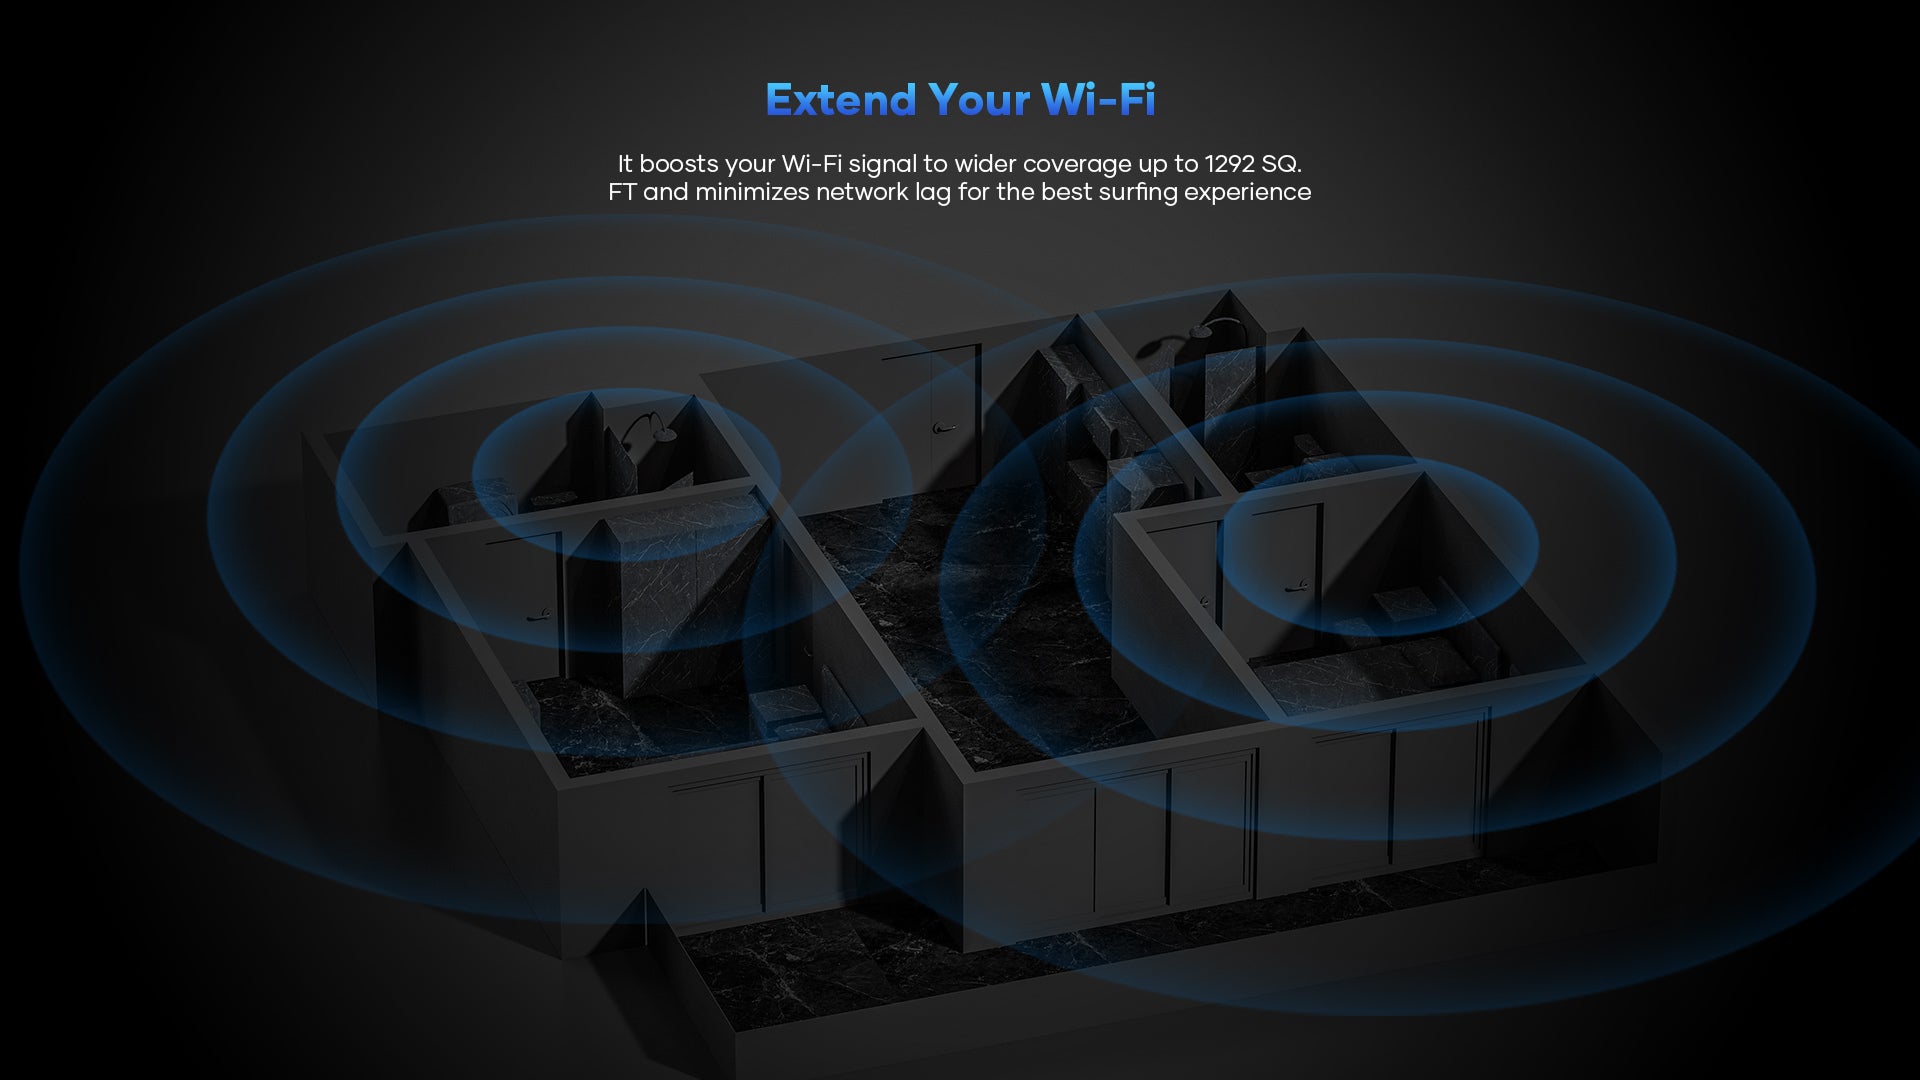 AC2100 extender boosts your Wi-Fi signal to coverage up to 1296 sq. ft.